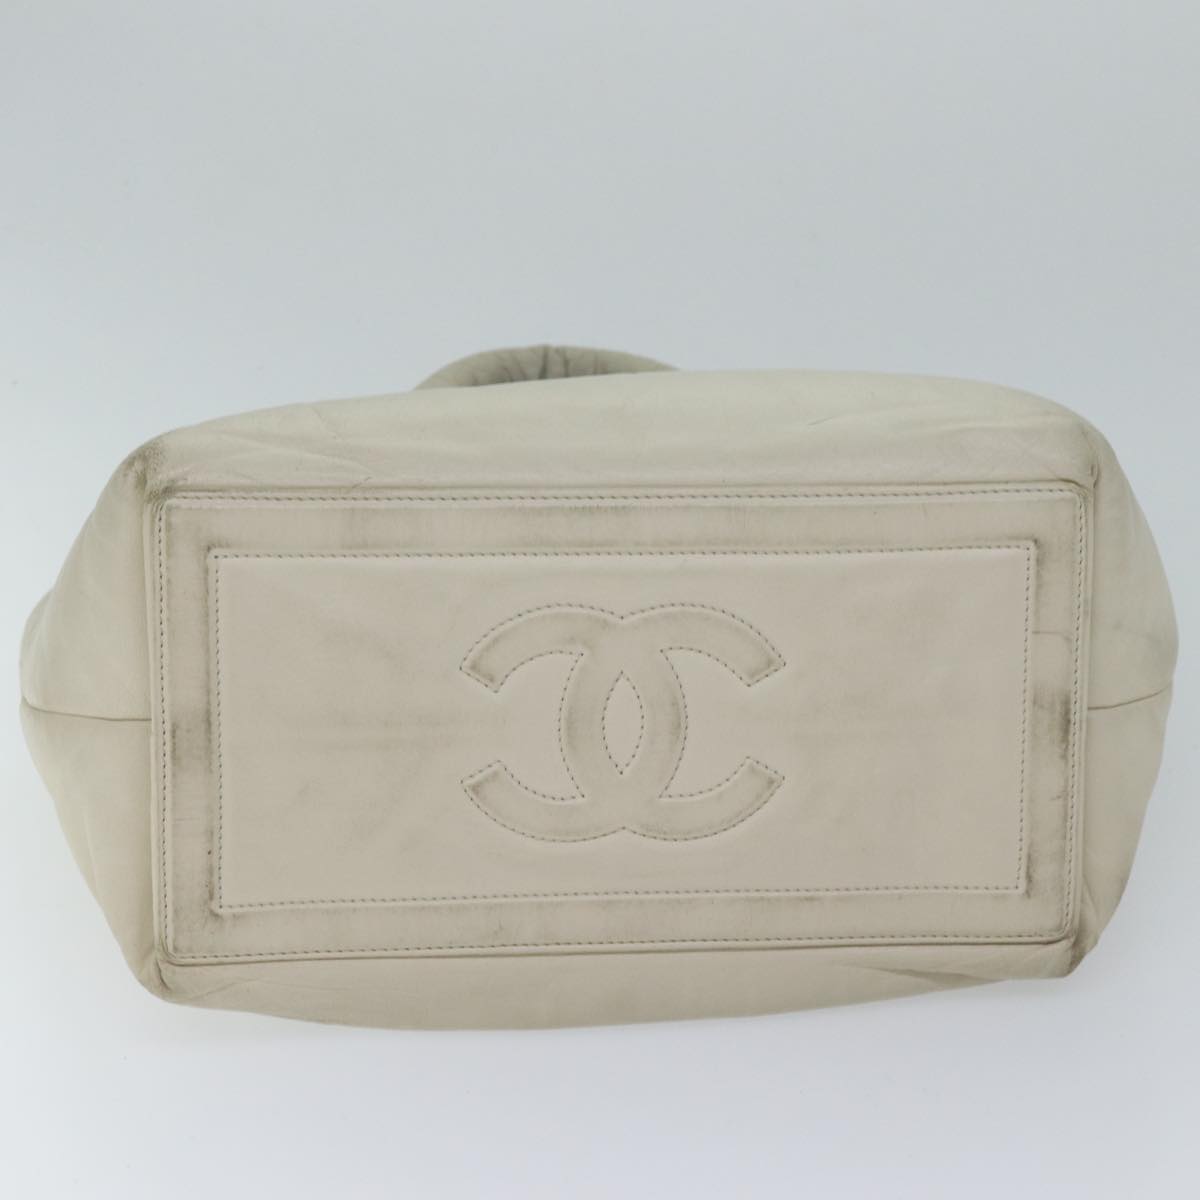 CHANEL Coco Cocoon Hand Bag Leather White CC Auth mr034